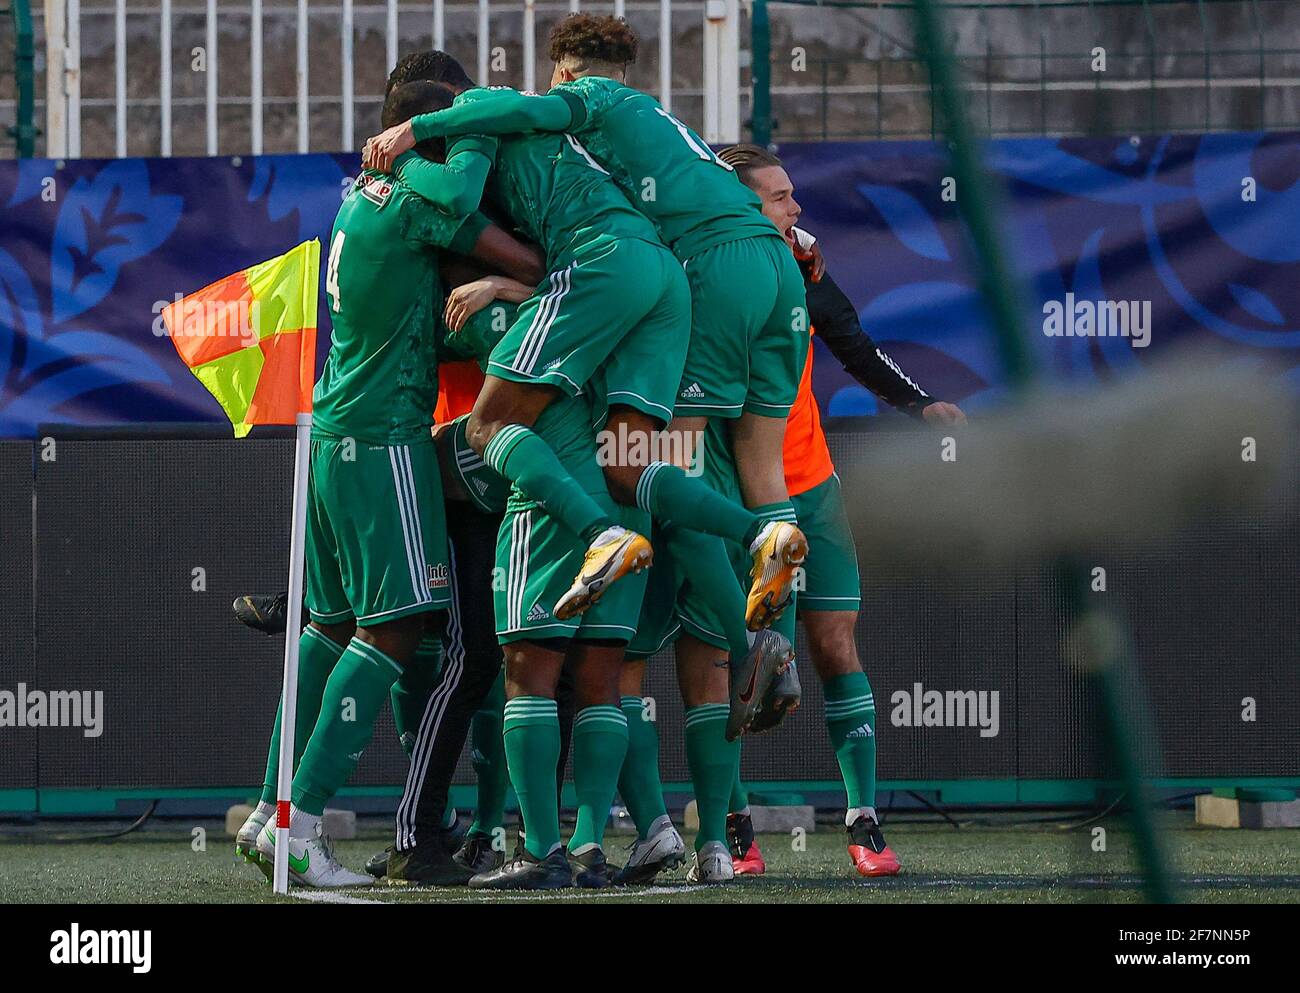 The REDSTAR team celebrate the equalization goal during the match between the REDSTAR and OLYMPIQUE LYONNAIS, at BAUER stadium on April 08, 2021 in Saint-Ouen, France. Photo by Loic BARATOUX/ABACAPRESS.COM Stock Photo